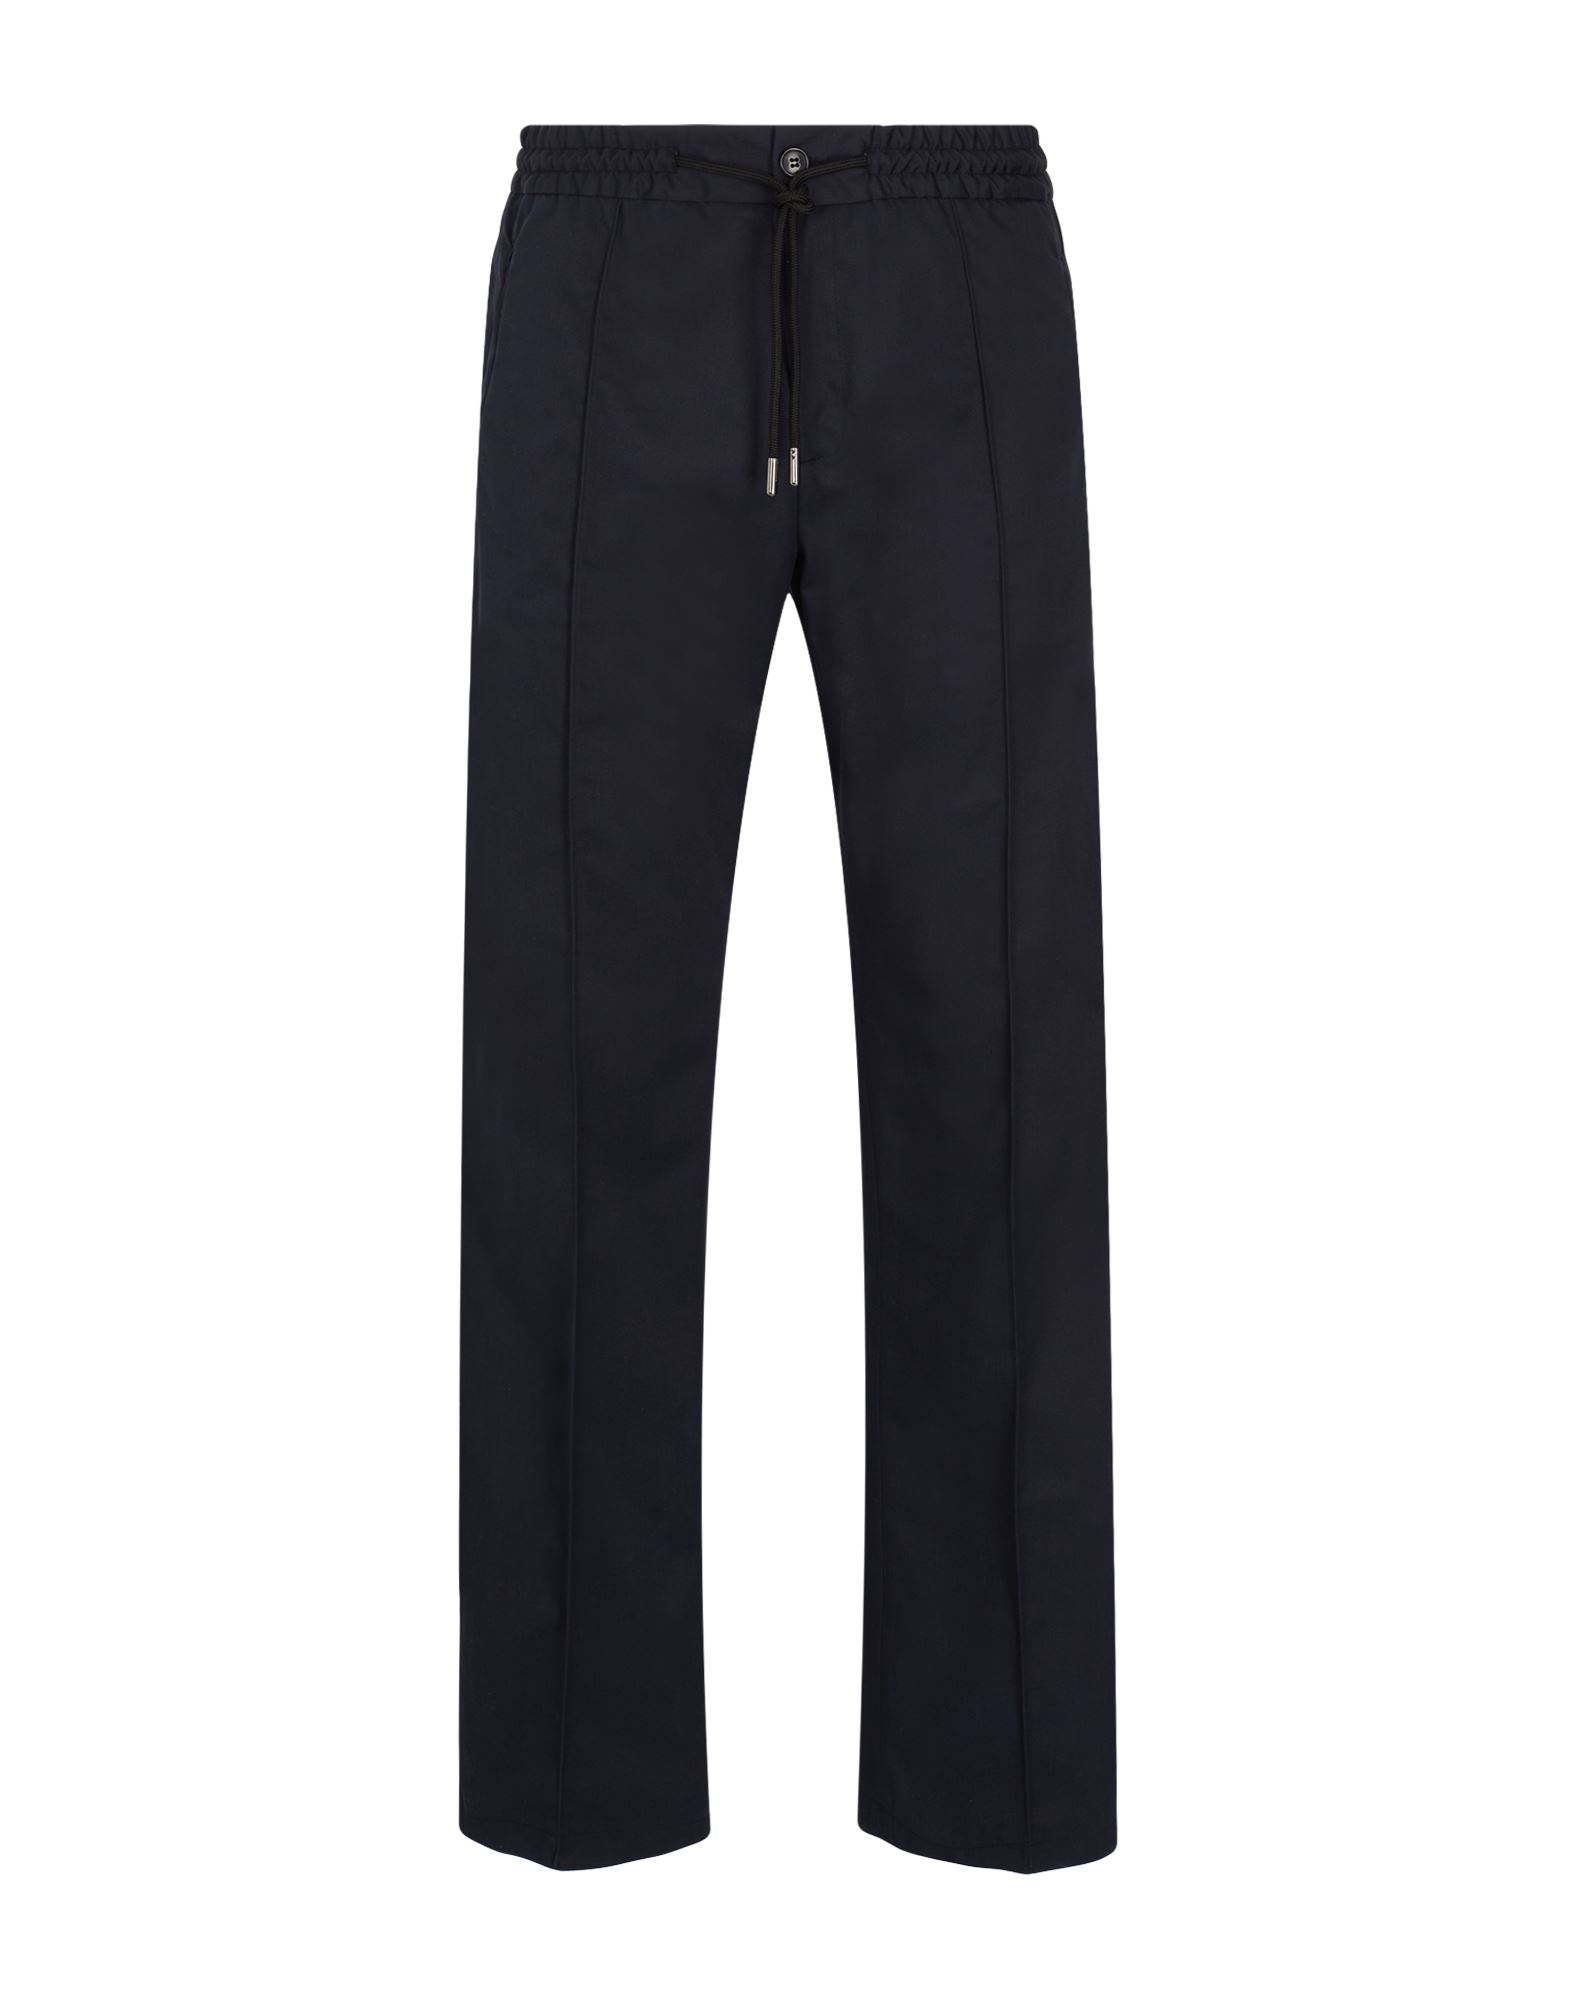 8 By Yoox Pants In Navy Blue